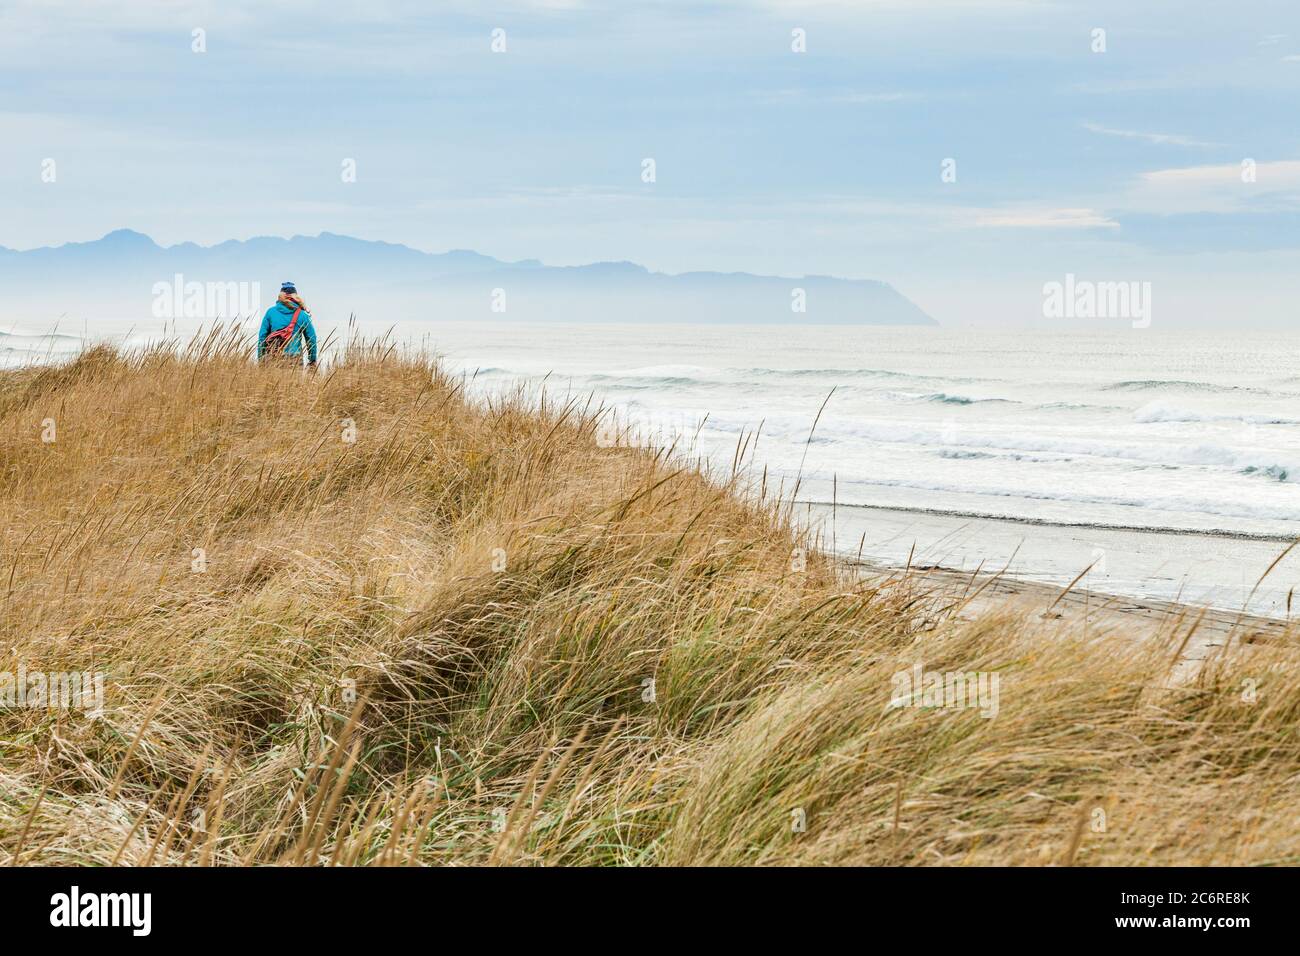 A woman hiking on the grassy sand dunes of Fort Stevens State Park along the Pacific coast, Oregon, USA. Stock Photo